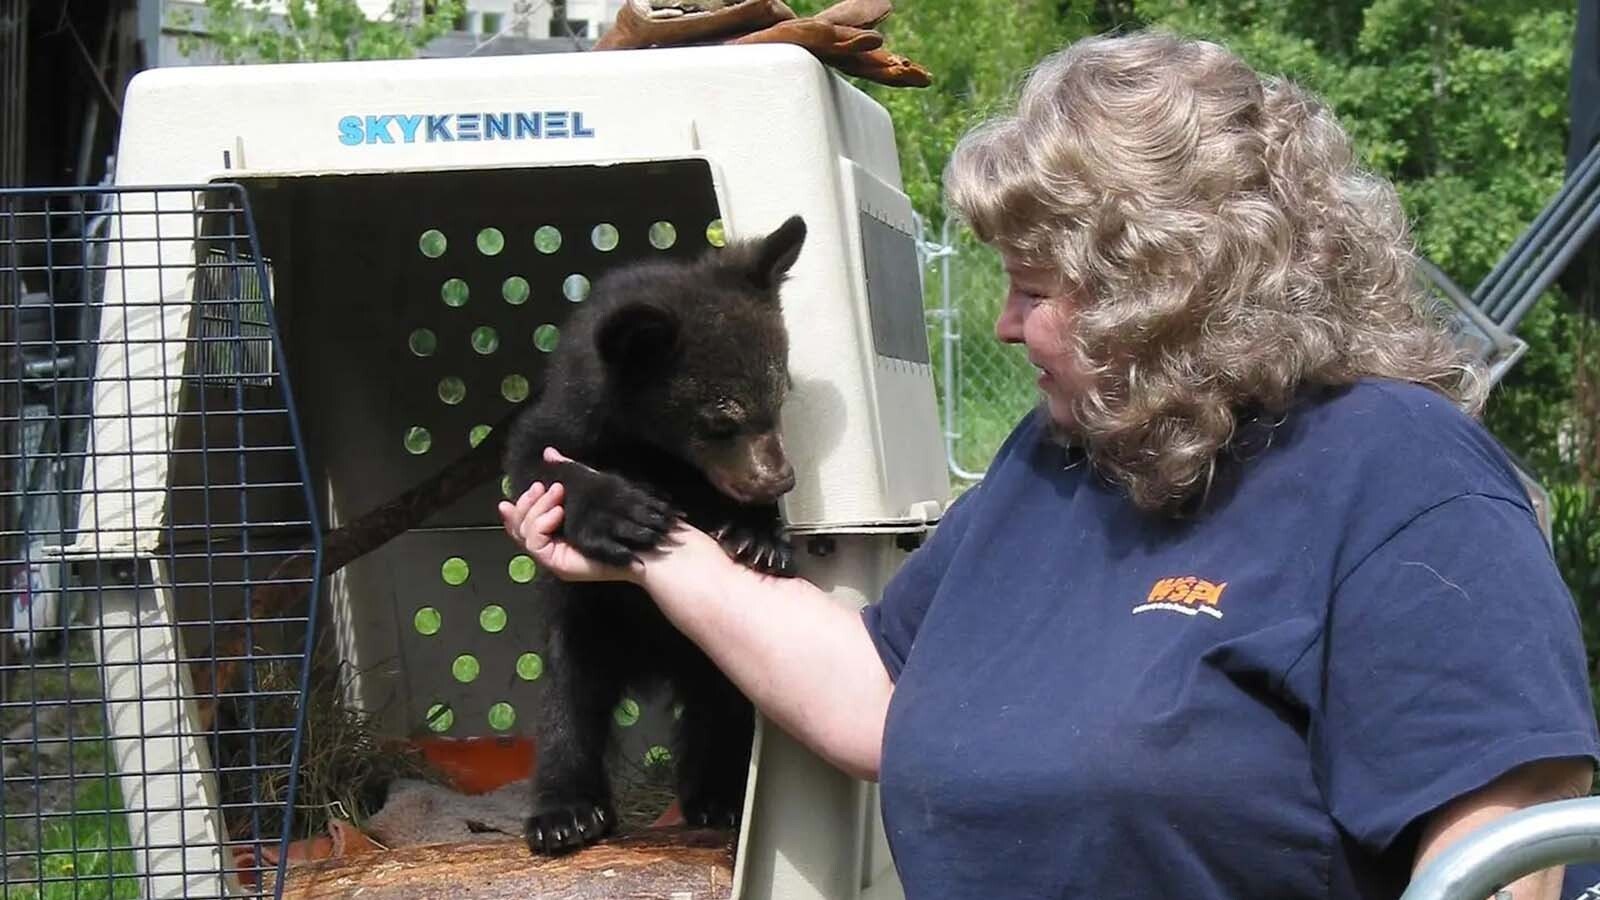 Sally Maughan founded Idaho Black Bear Rehab in Garden City, Idaho in 1989, and continued working with bear cubs until her death in 2021.